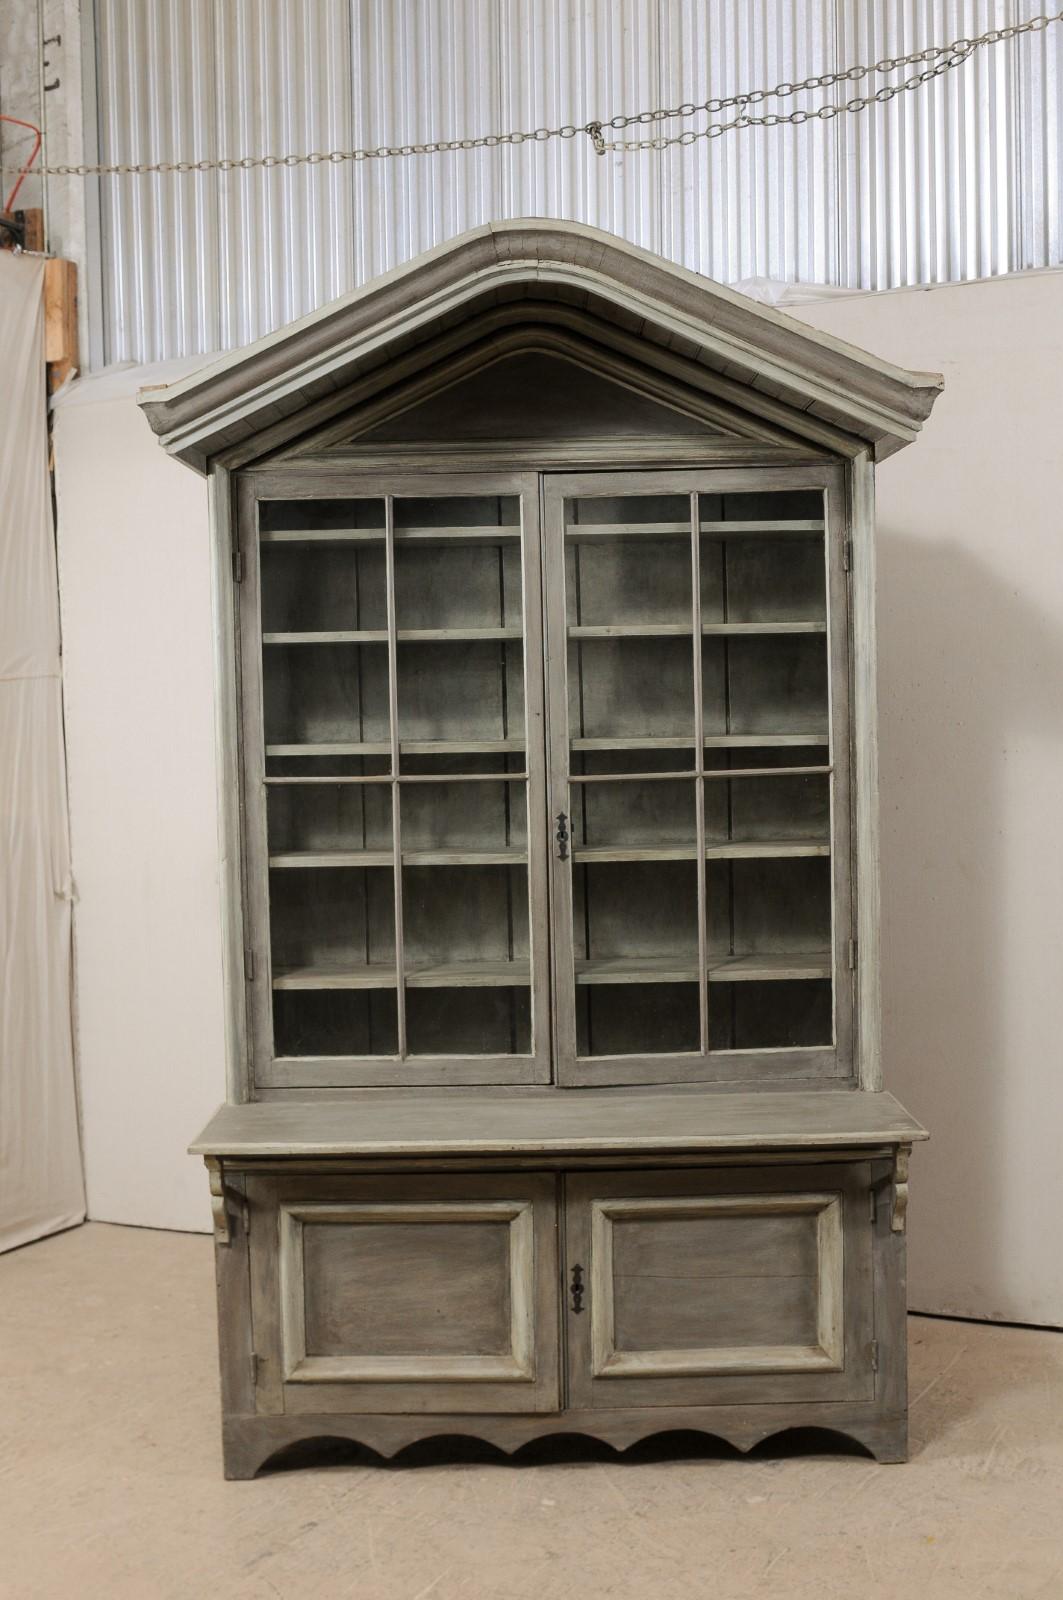 A fabulous early 19th century American shop cabinet with upper glass doors and a pronounced canopy bonnet. This unique antique display and storage cabinet, standing approximately 8.5 feet tall, features an arched bonnet top, which overhangs as a